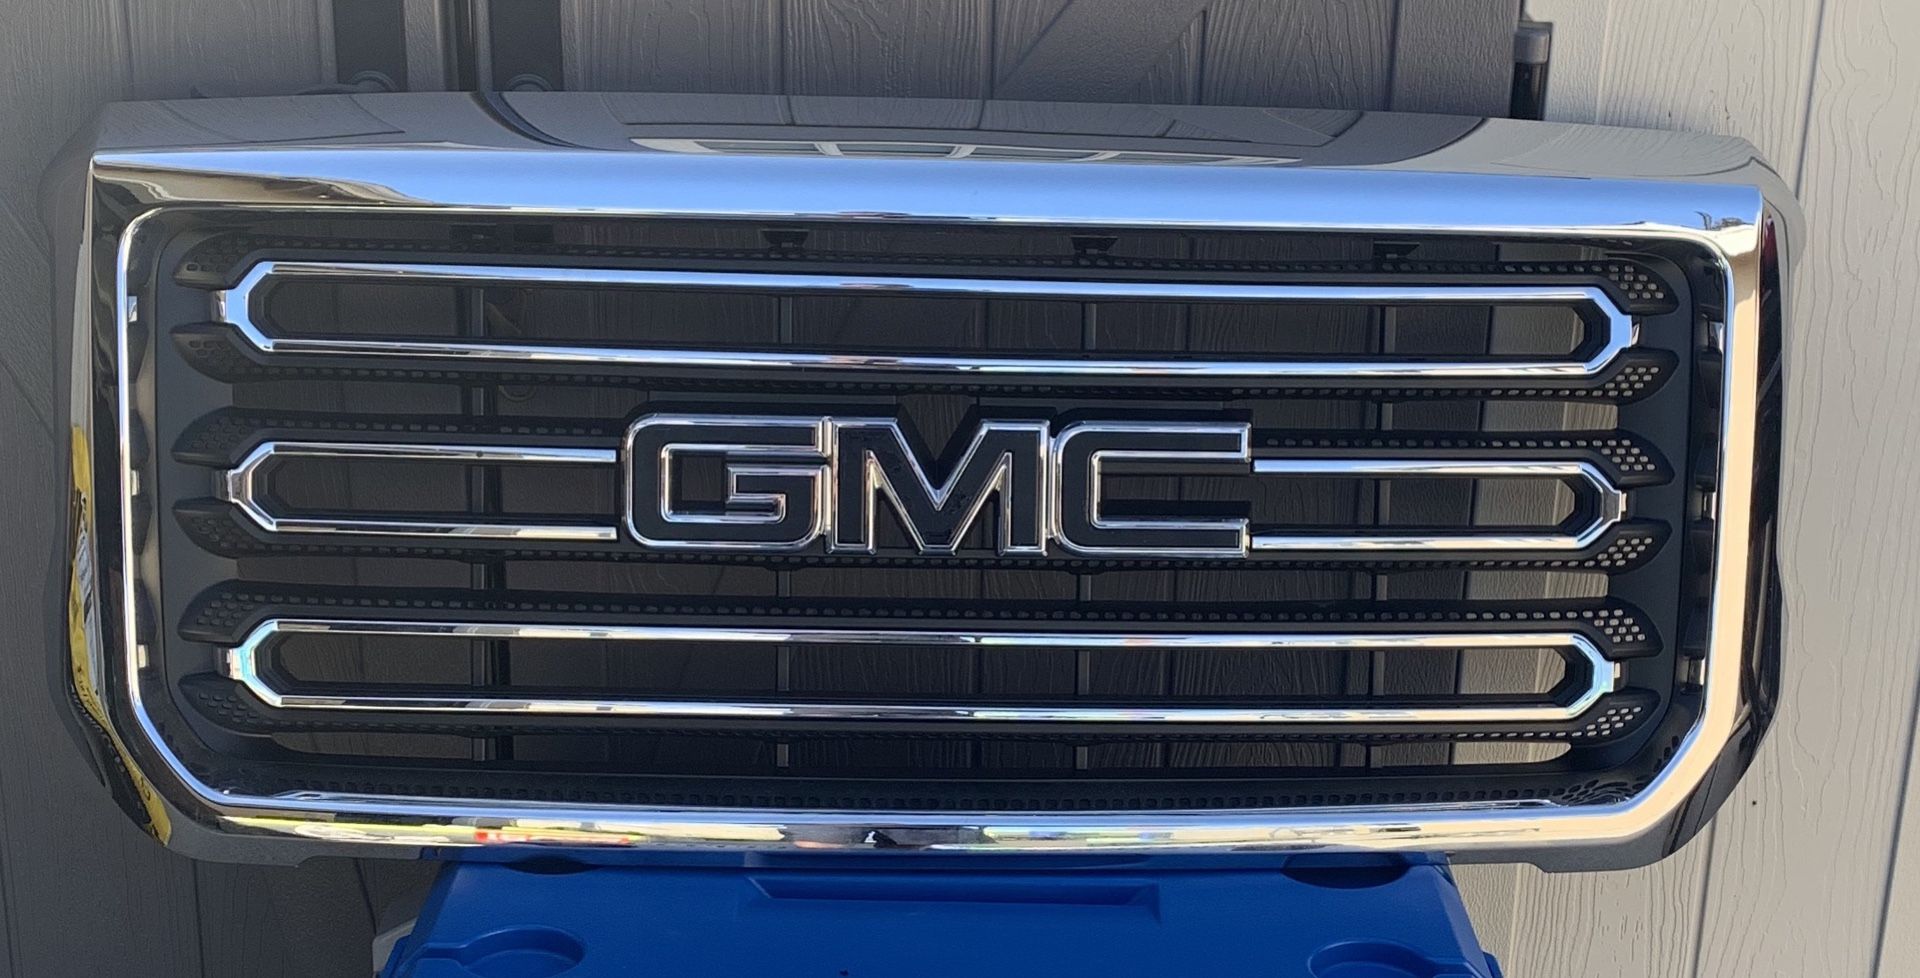 Gmc grille